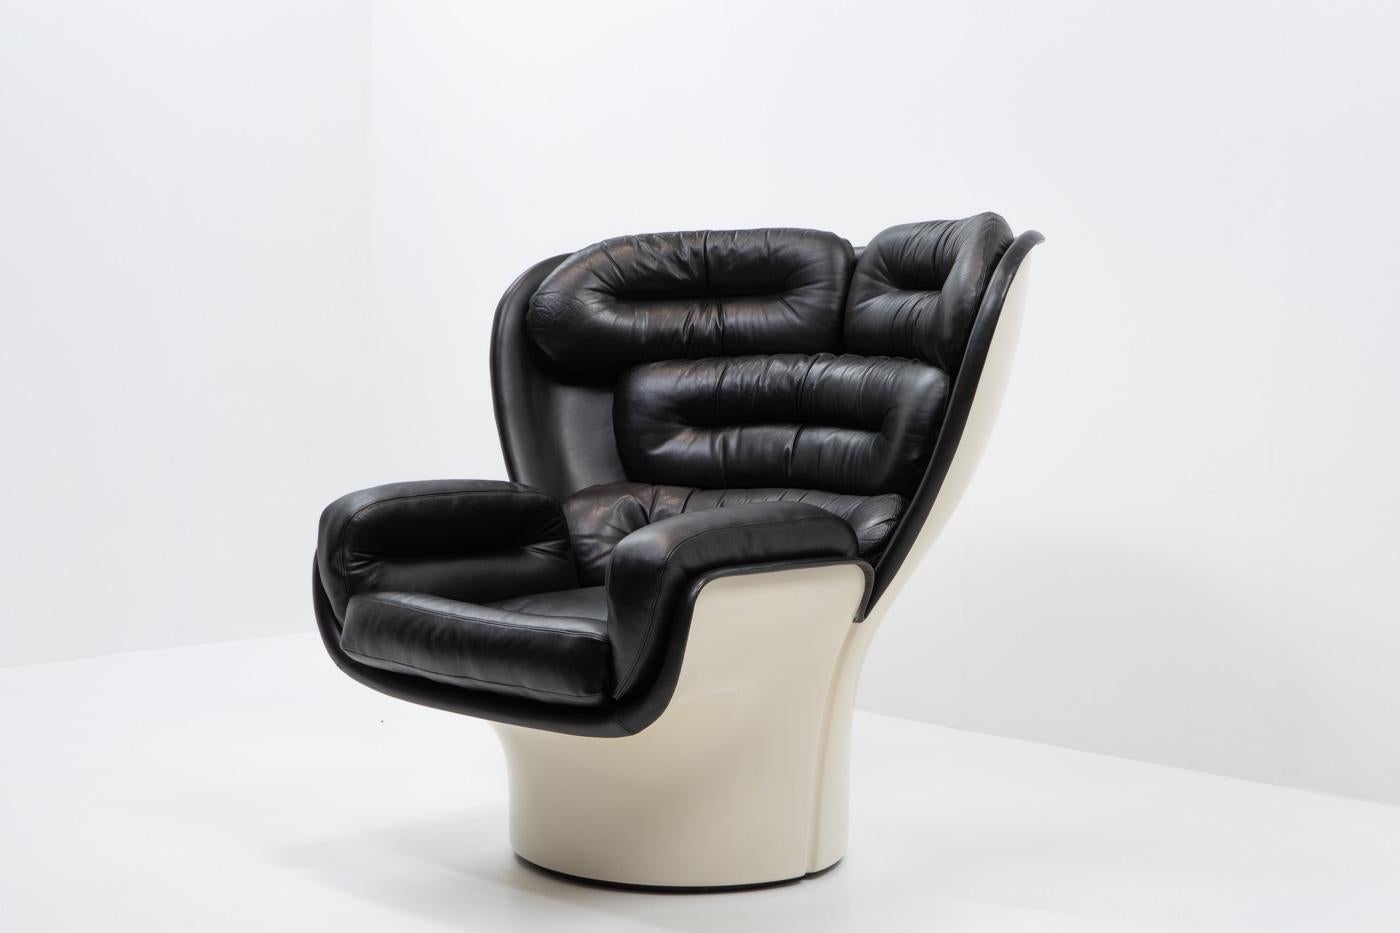 Late 20th Century Italian Design Classic Elda Lounge Chair by Joe Colombo, 1970s Italy For Sale